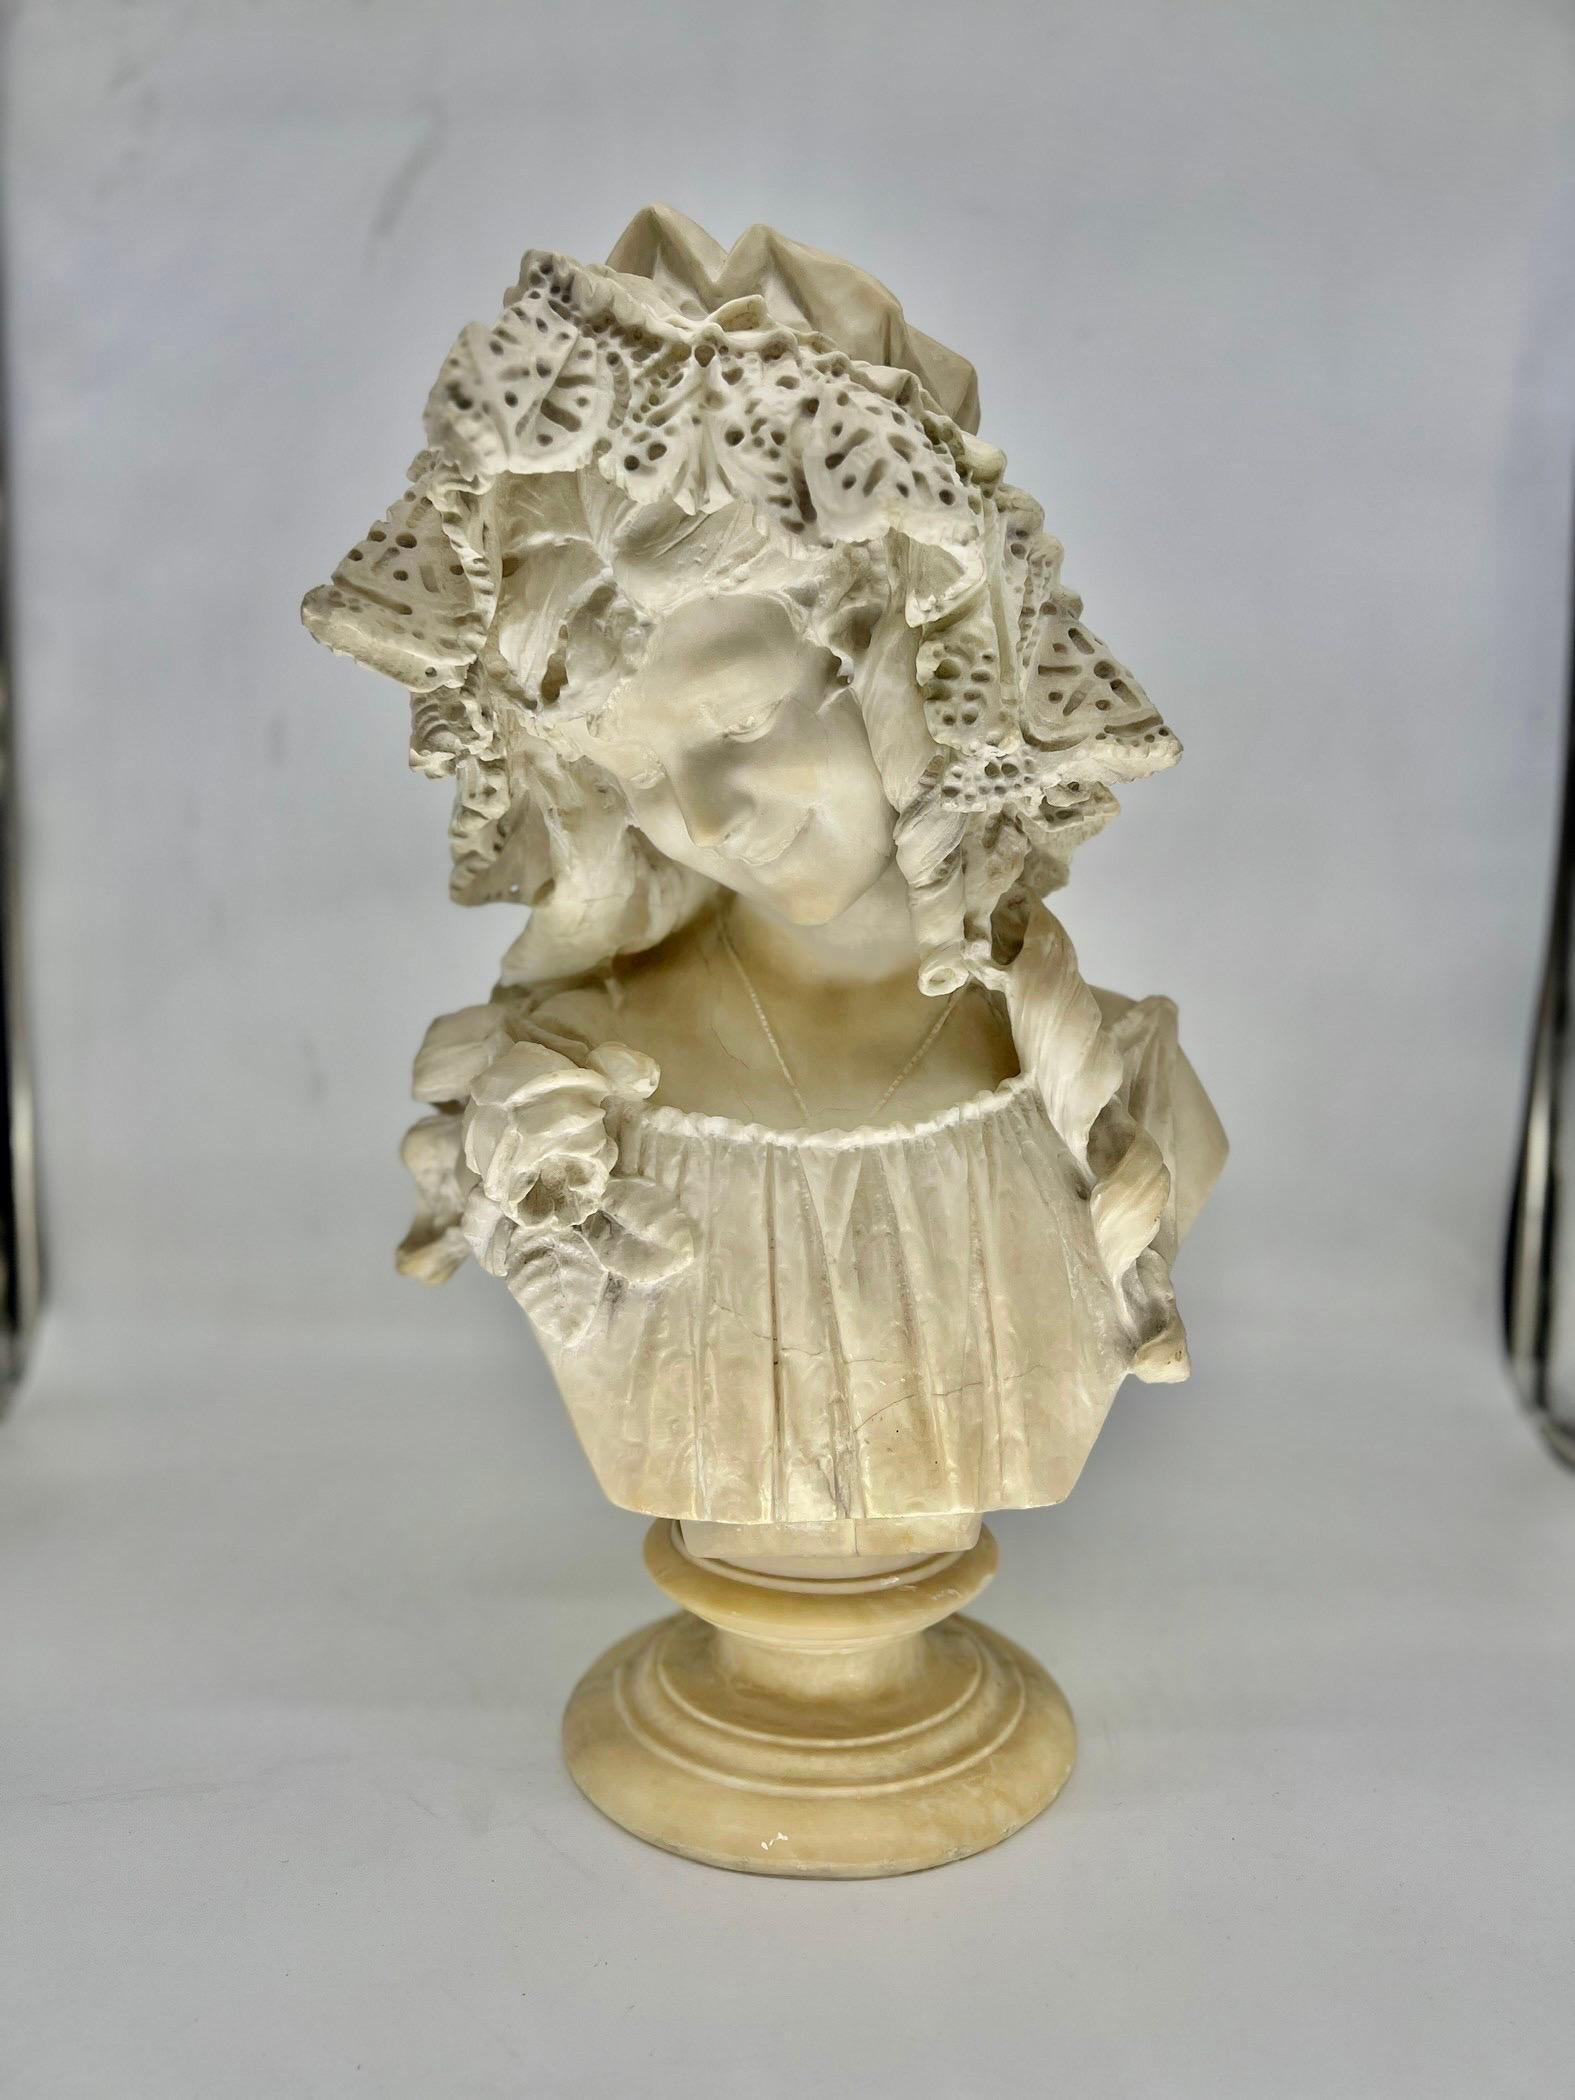 Antonio Frilli Italian Carved Alabaster Bust of a Young Women Circa 1895.

A carved alabaster bust of young girl wearing a frilled lace bonnet and finely carved decoration to bust. Signed to verso.

Note: Statue is in 2 parts. Bust detaches from